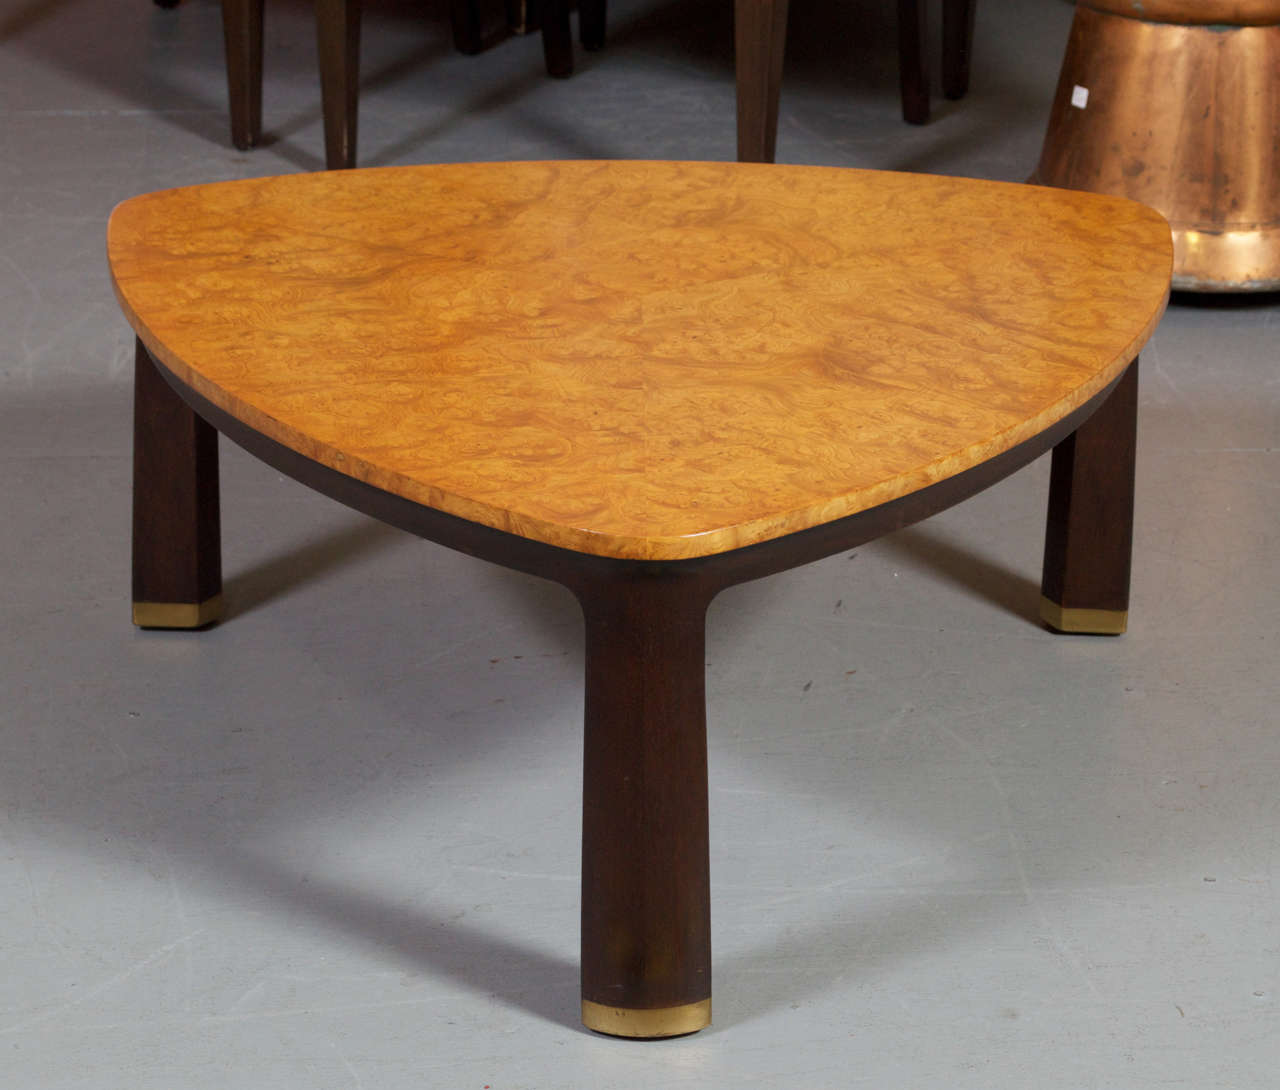 For your consideration is this versatile triangular table designed by Edward Wormley for Dunbar.  This 1950's/ 60's table has the presence and scale of a coffee table but can also be utilized as a occasional table.

***Located at our Lombard St